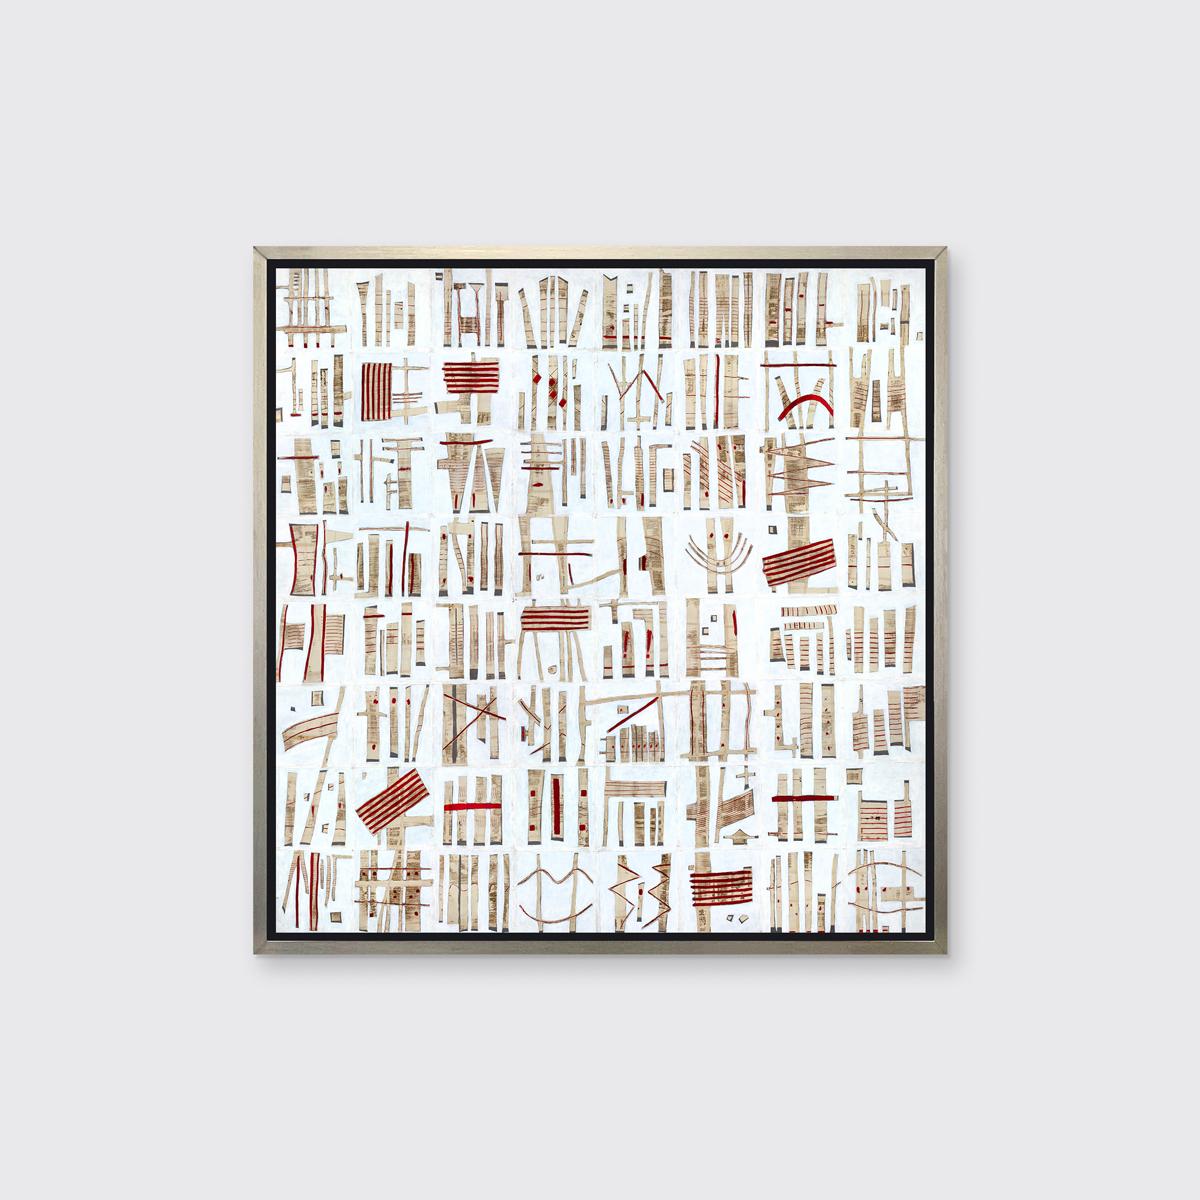 Sofie Swann Abstract Print - "Bedtime Story, " Framed Limited Edition Giclee Print, 40" x 40"